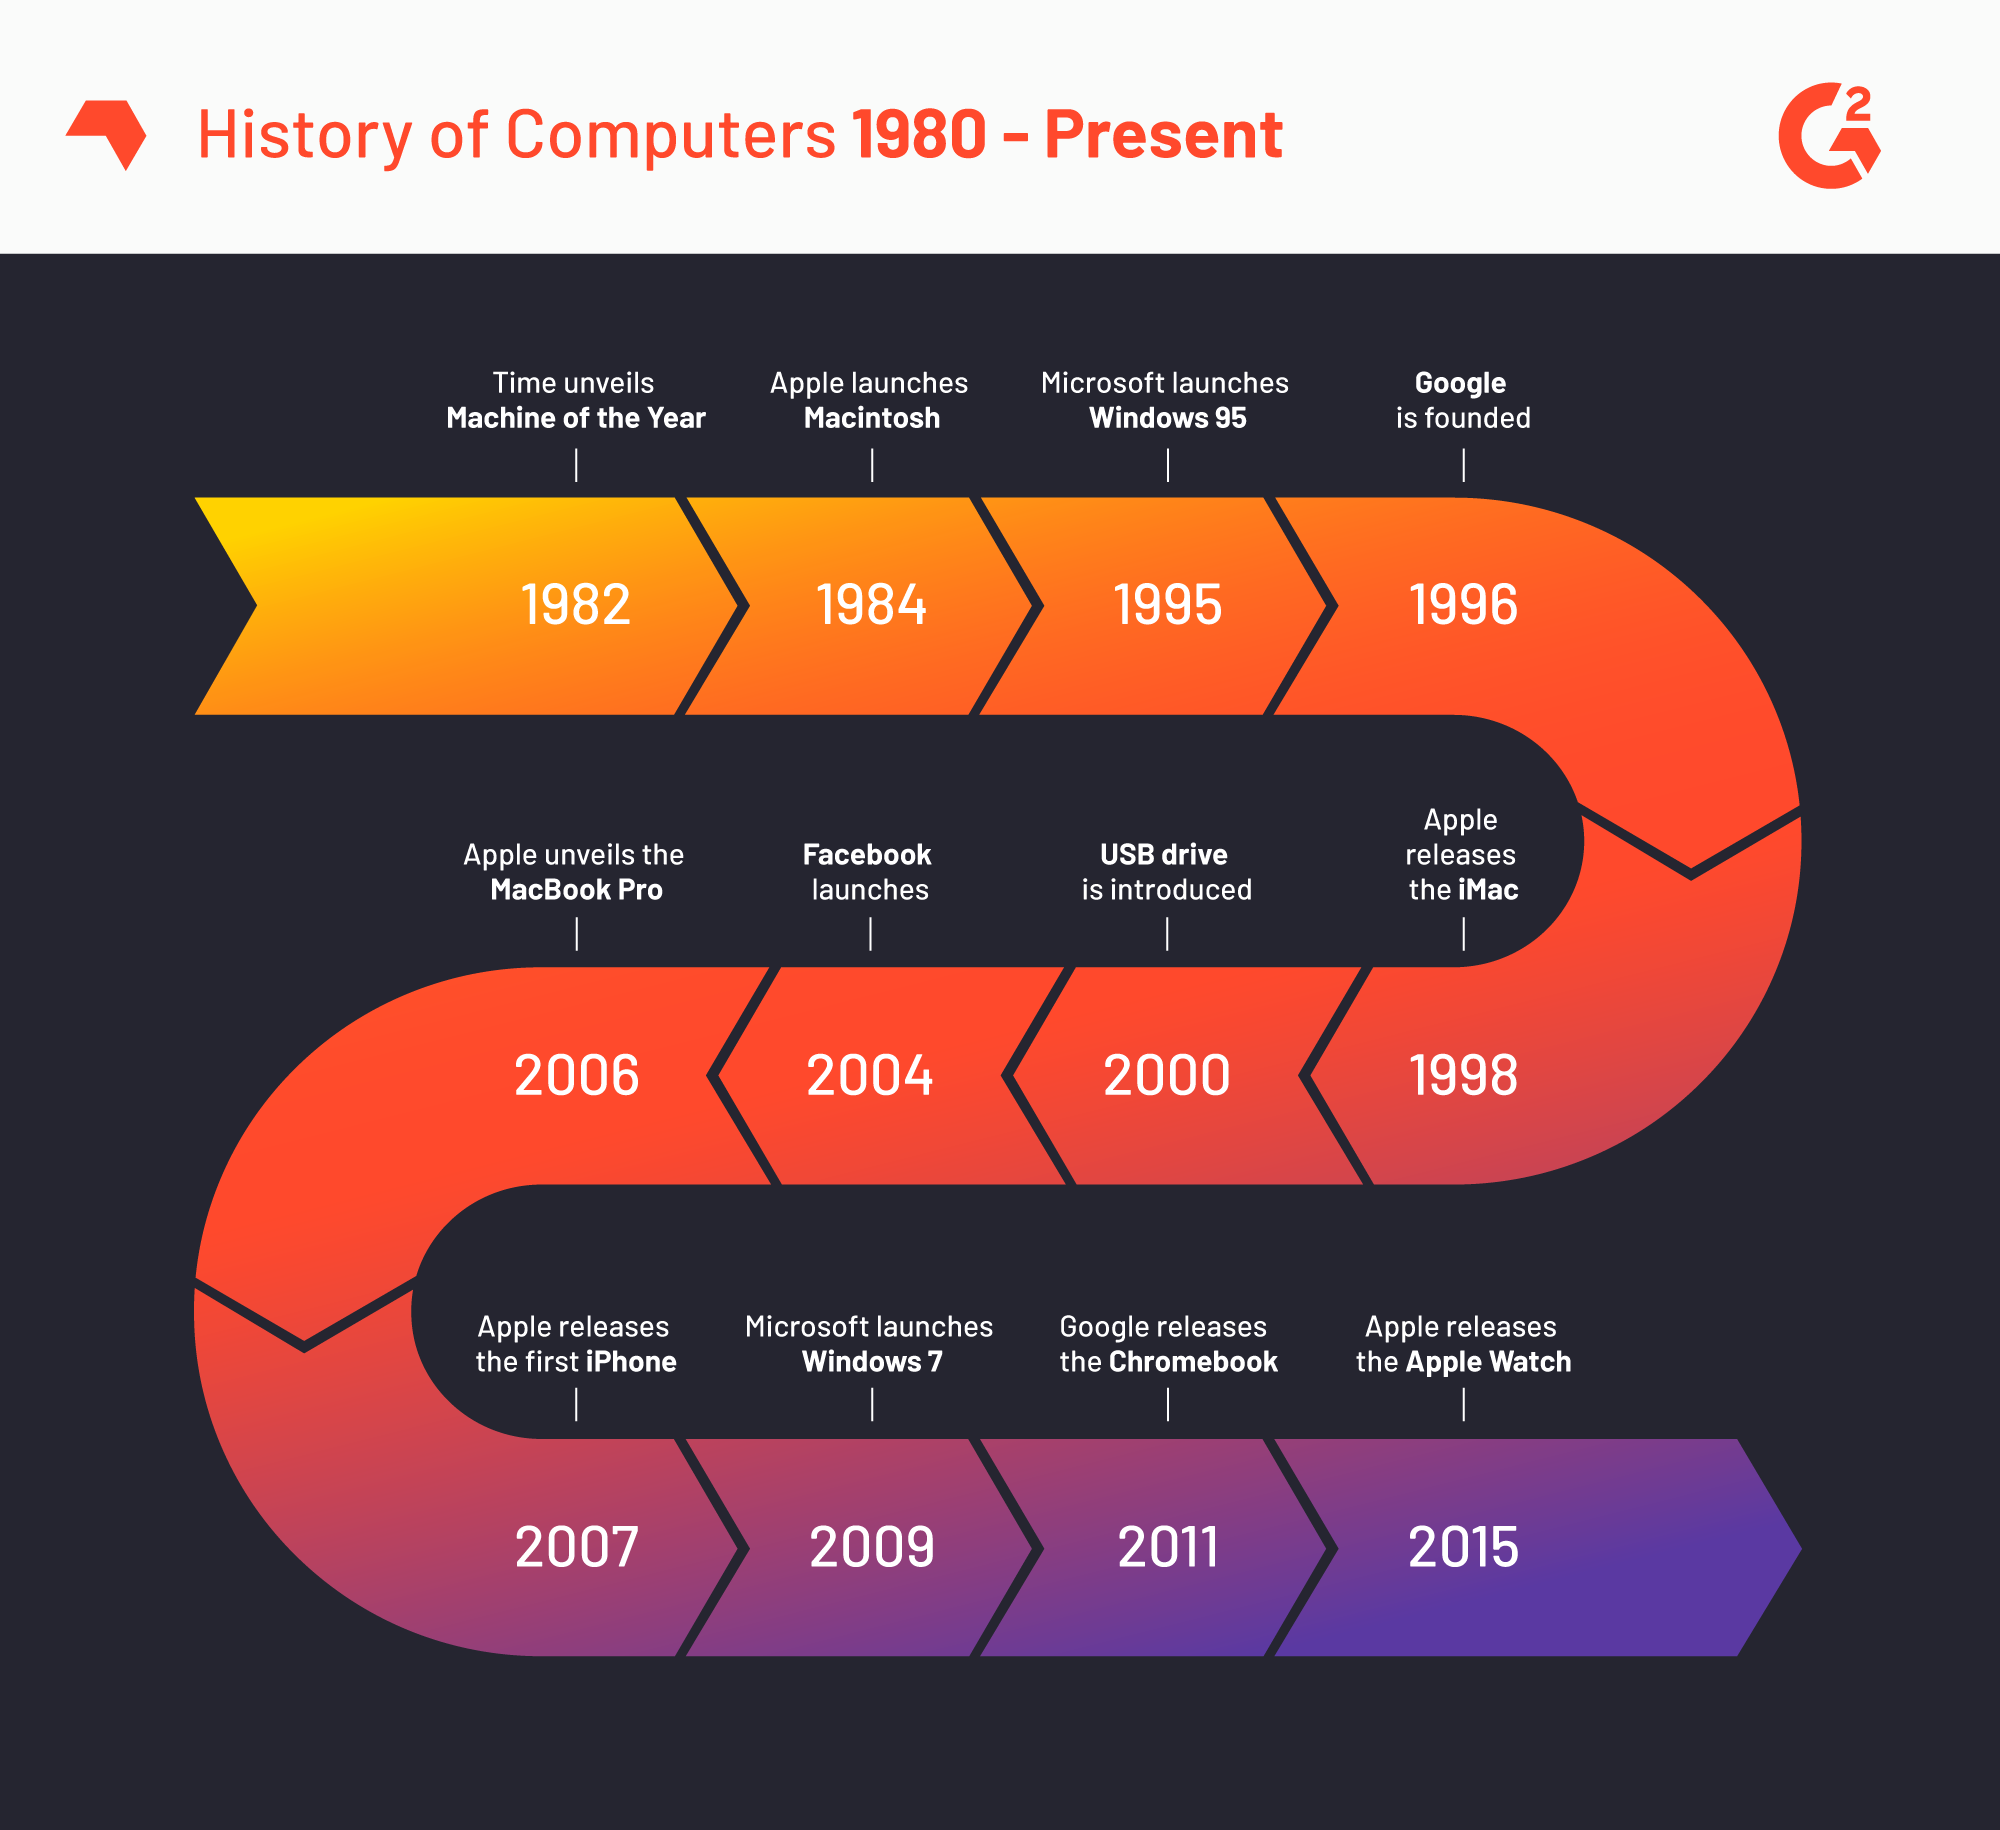 History of Computers 1980 to present